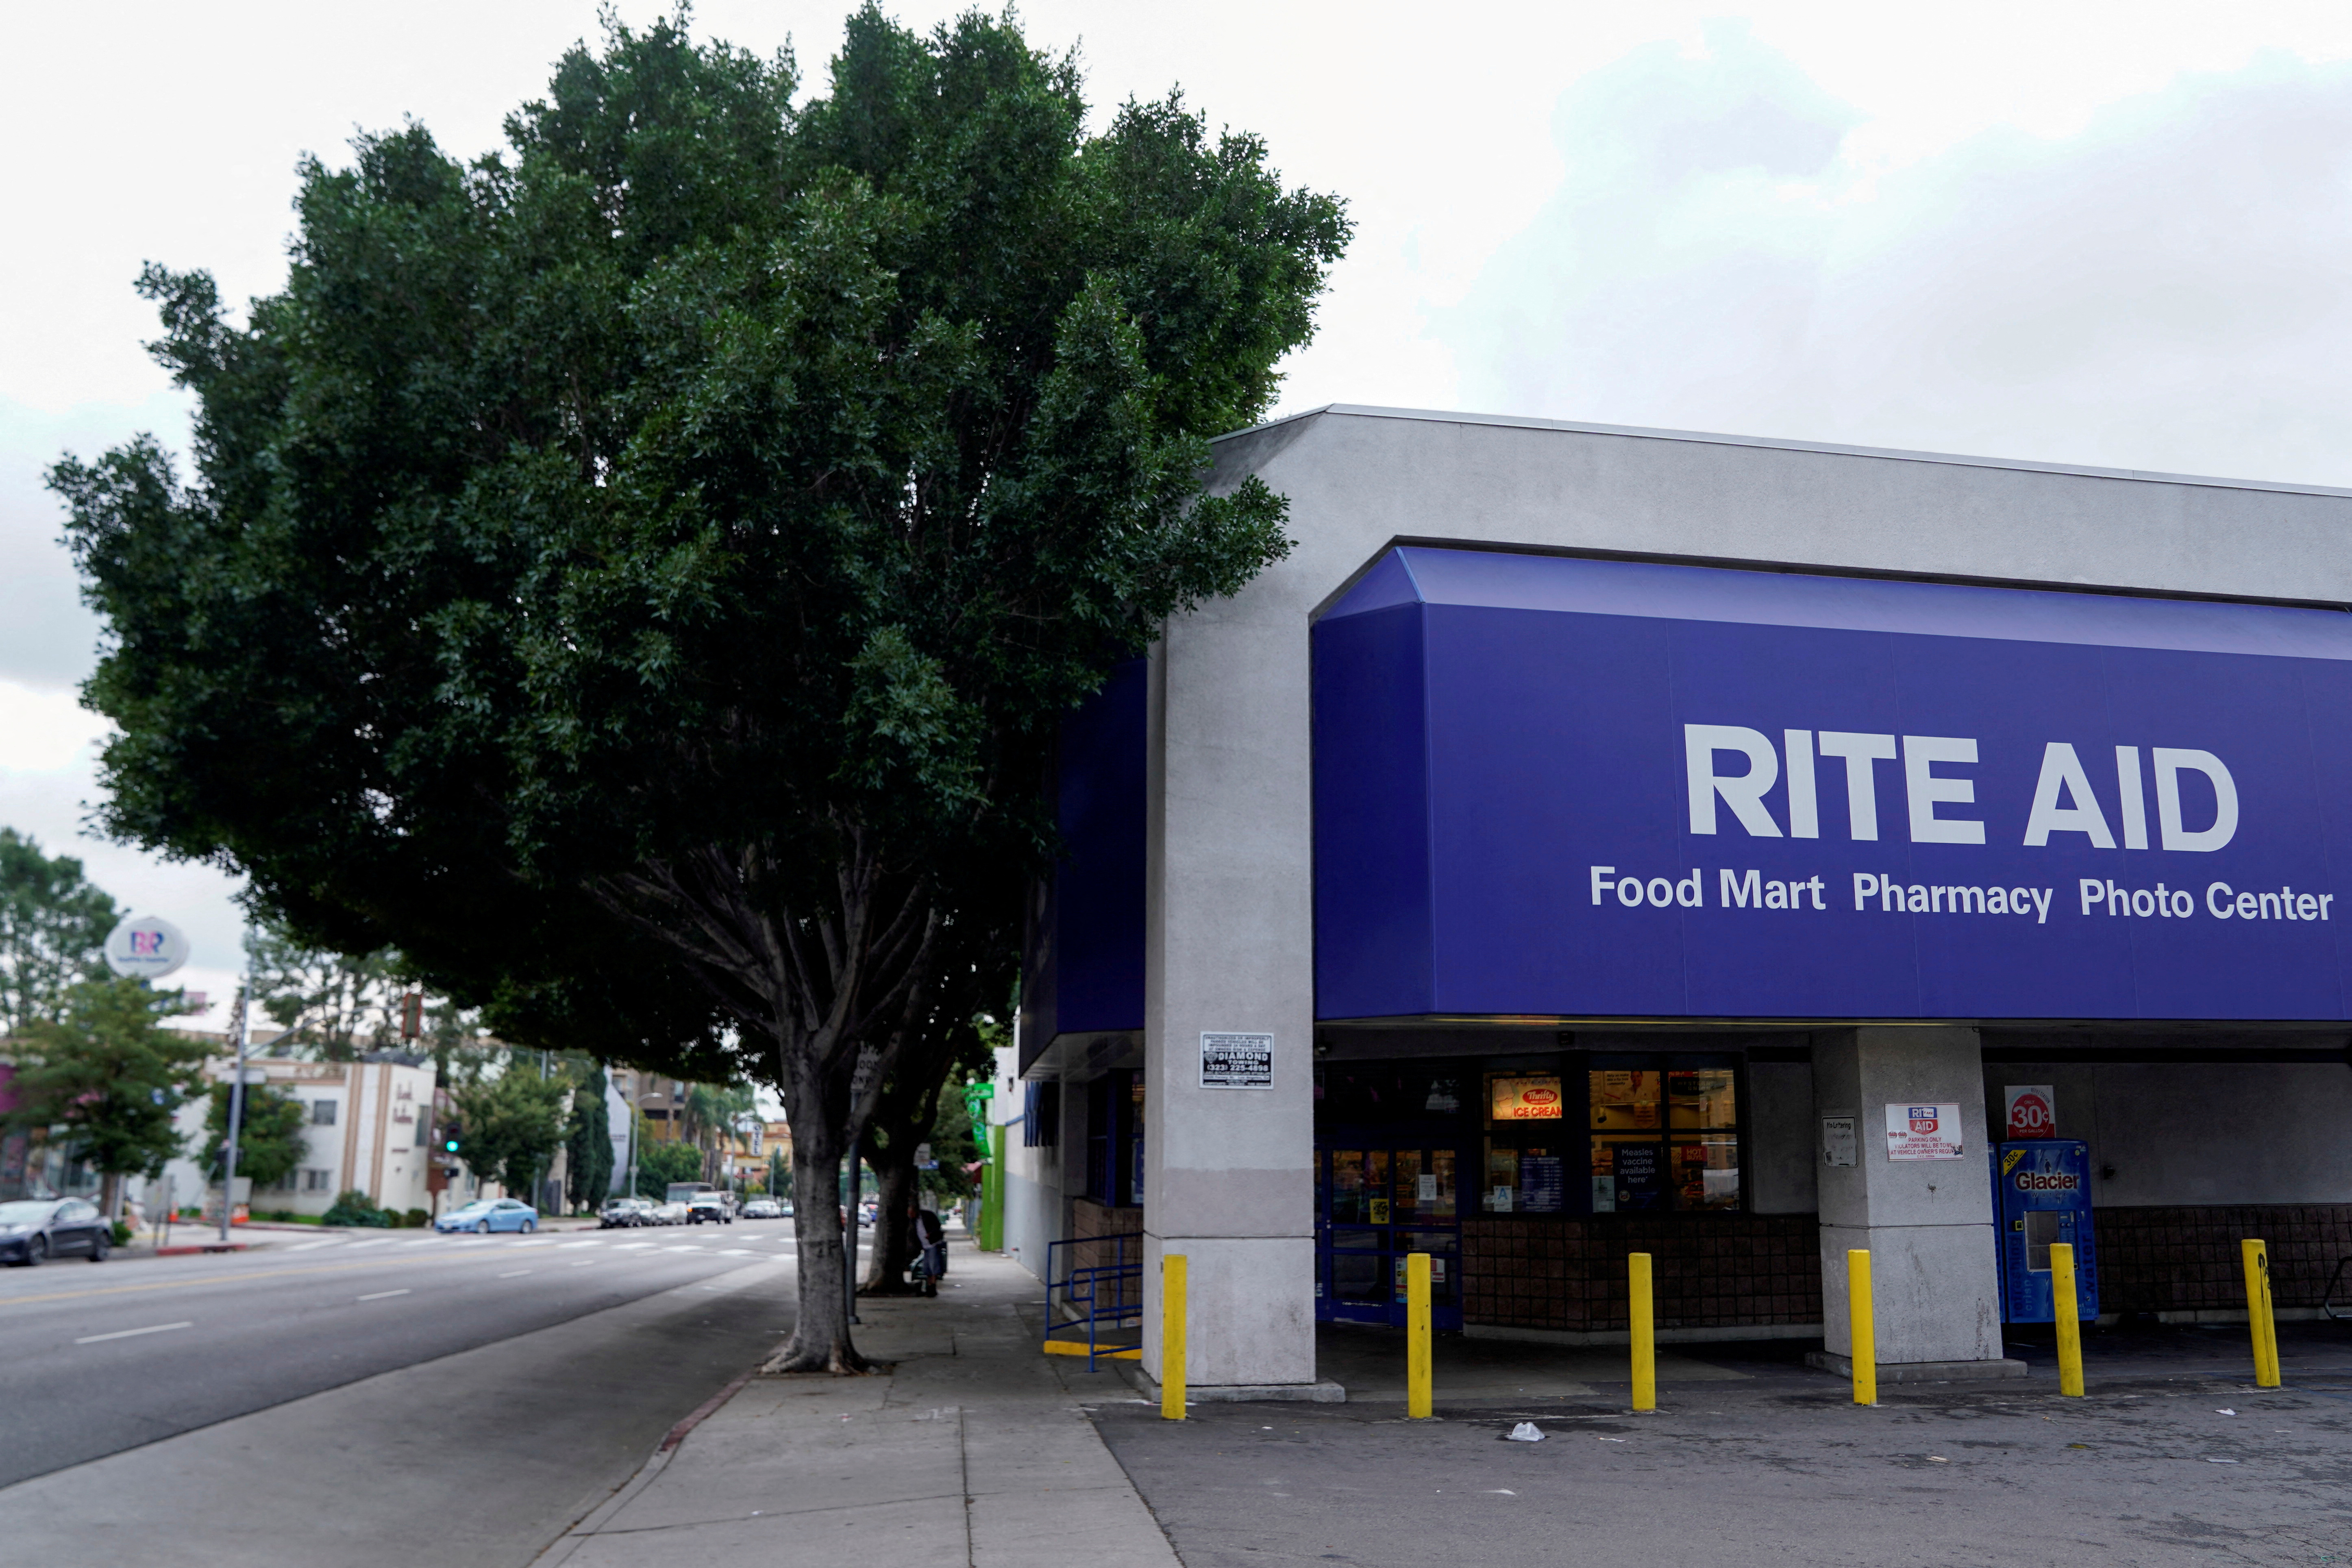 A Rite Aid store is shown in Los Angeles, California